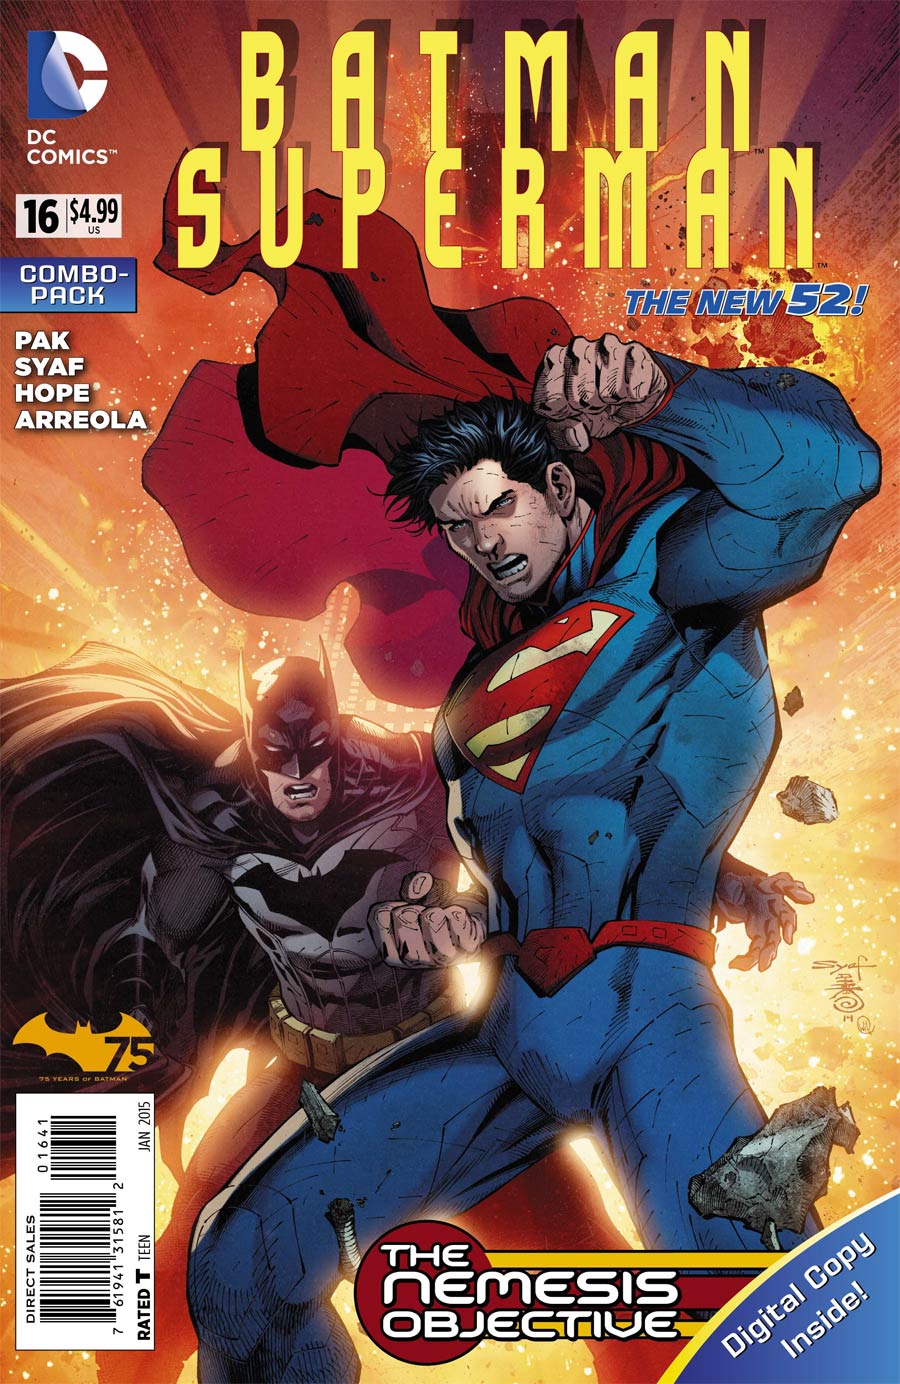 Batman Superman #16 Cover D Combo Pack Without Polybag